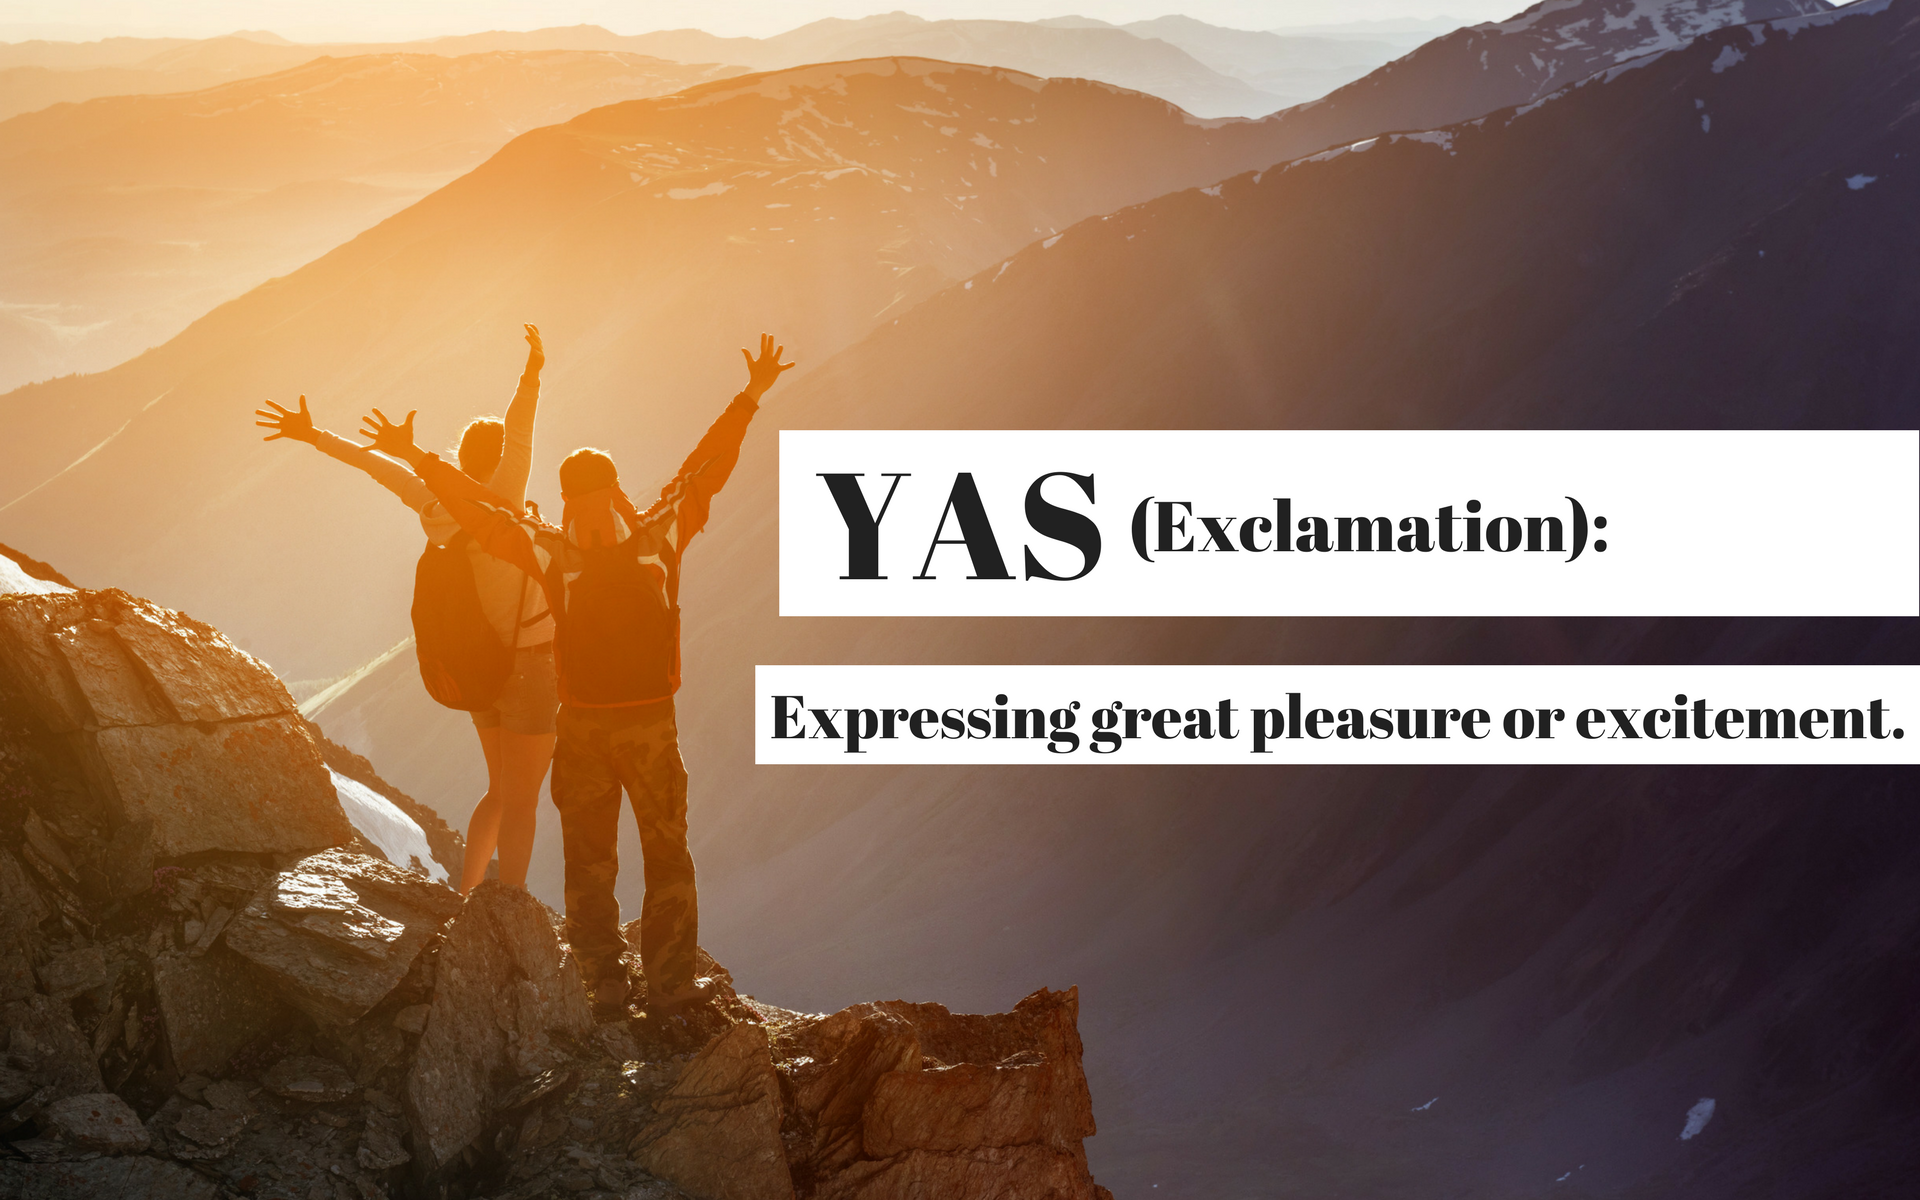 The Latest Additions to the Oxford Dictionary Include "Yas" and "Squad Goals"